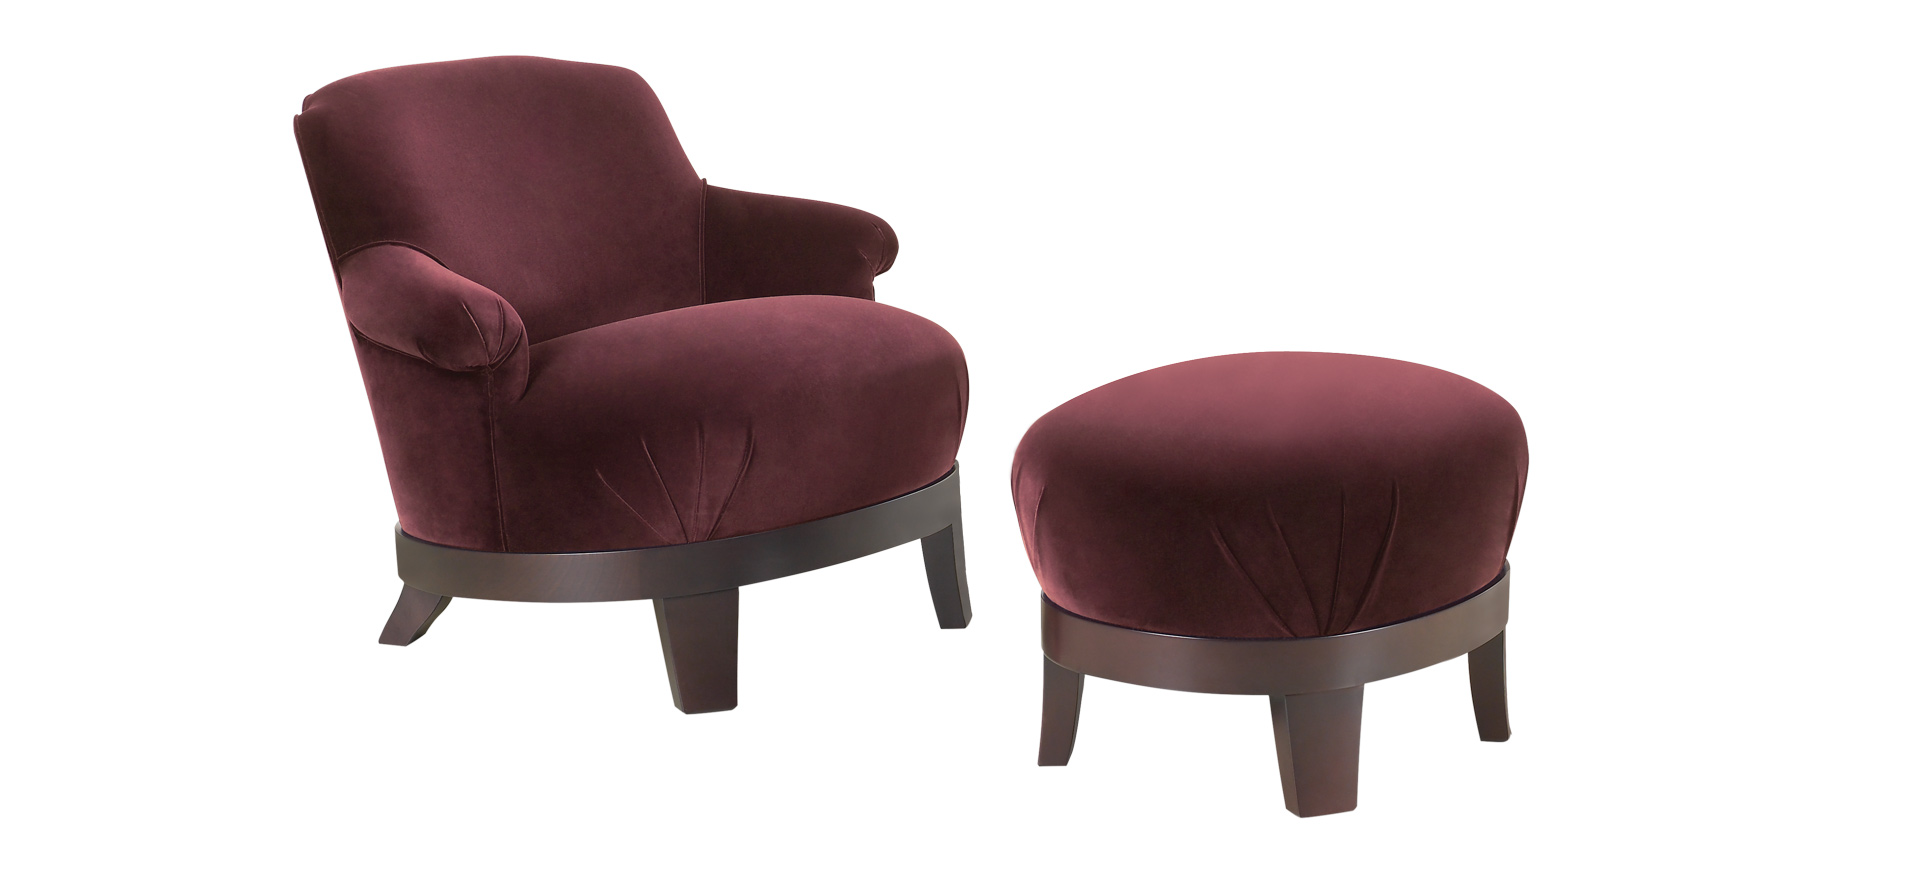 Gacy is a wooden armchair covered in fabric or leather, from Promemoria's catalogue | Promemoria